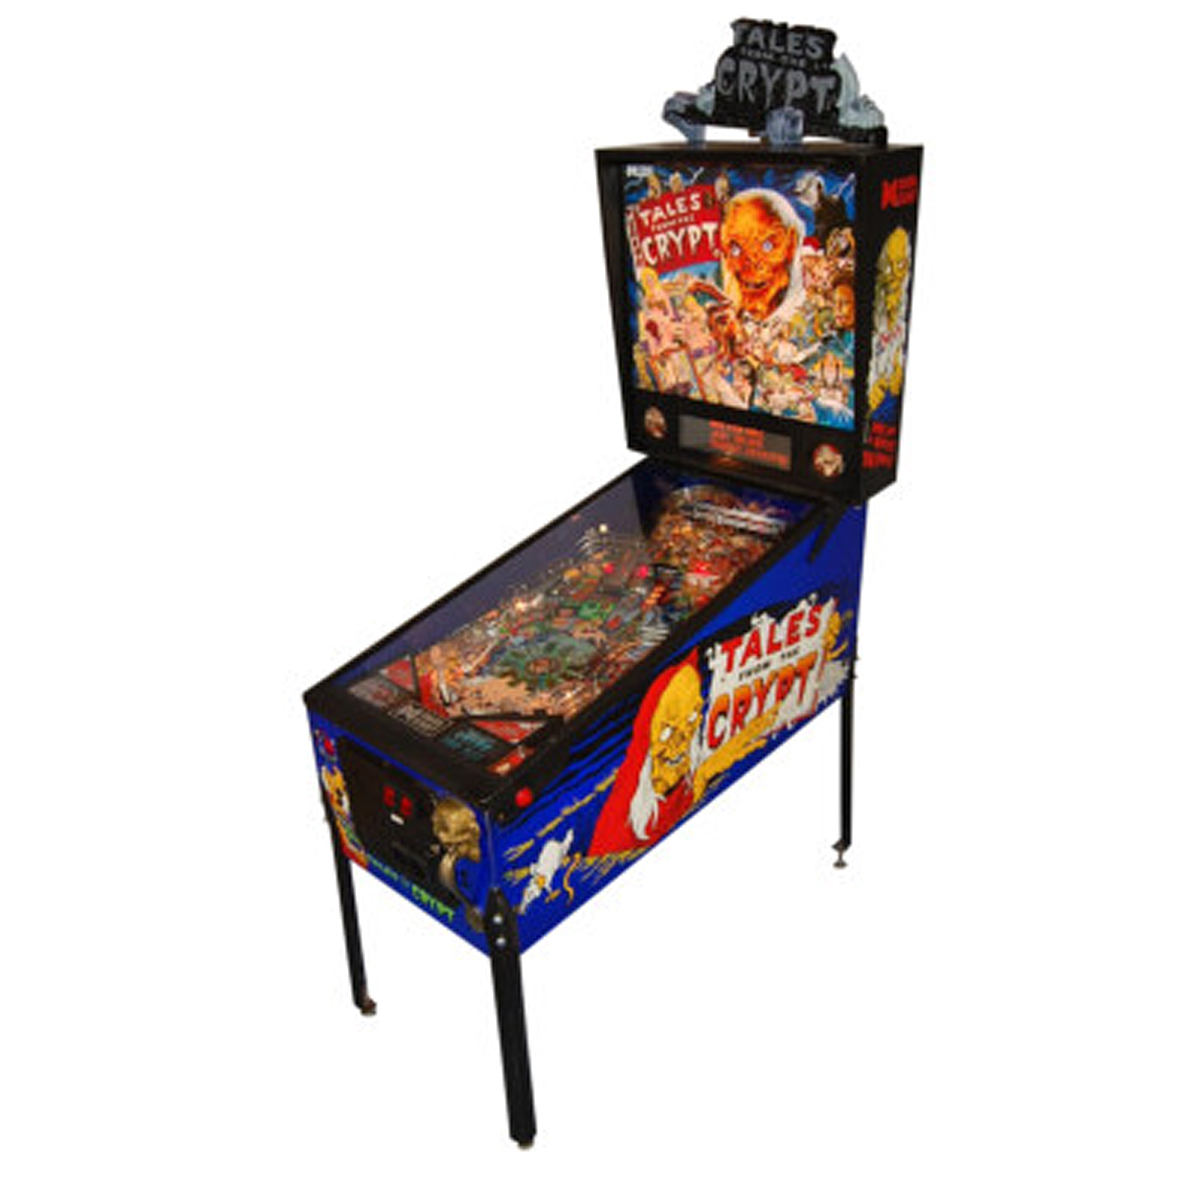 Tales from the Crypt Pinball Machine Cover